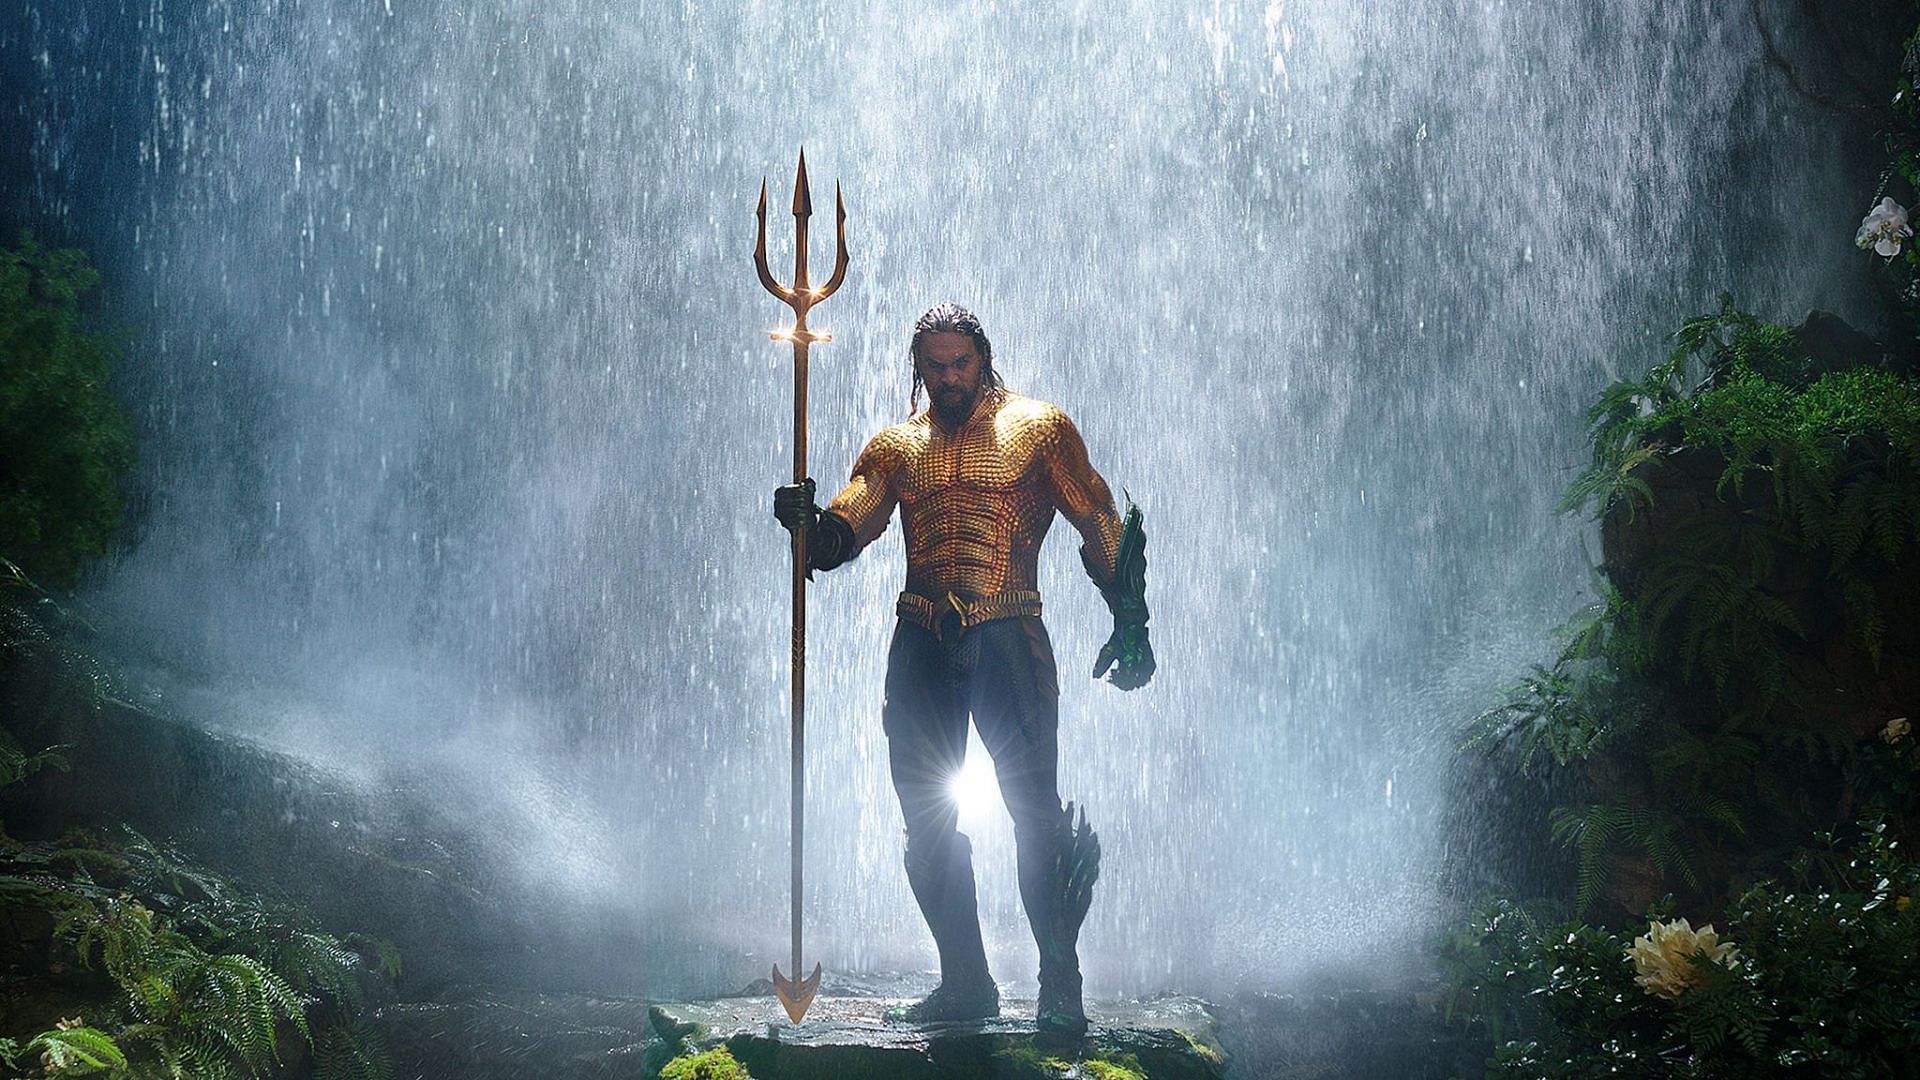 While Aquaman may have gained some popularity due to his recent portrayal in the DC Extended Universe films, he is still largely overrated as a superhero (Image via DC Studios)